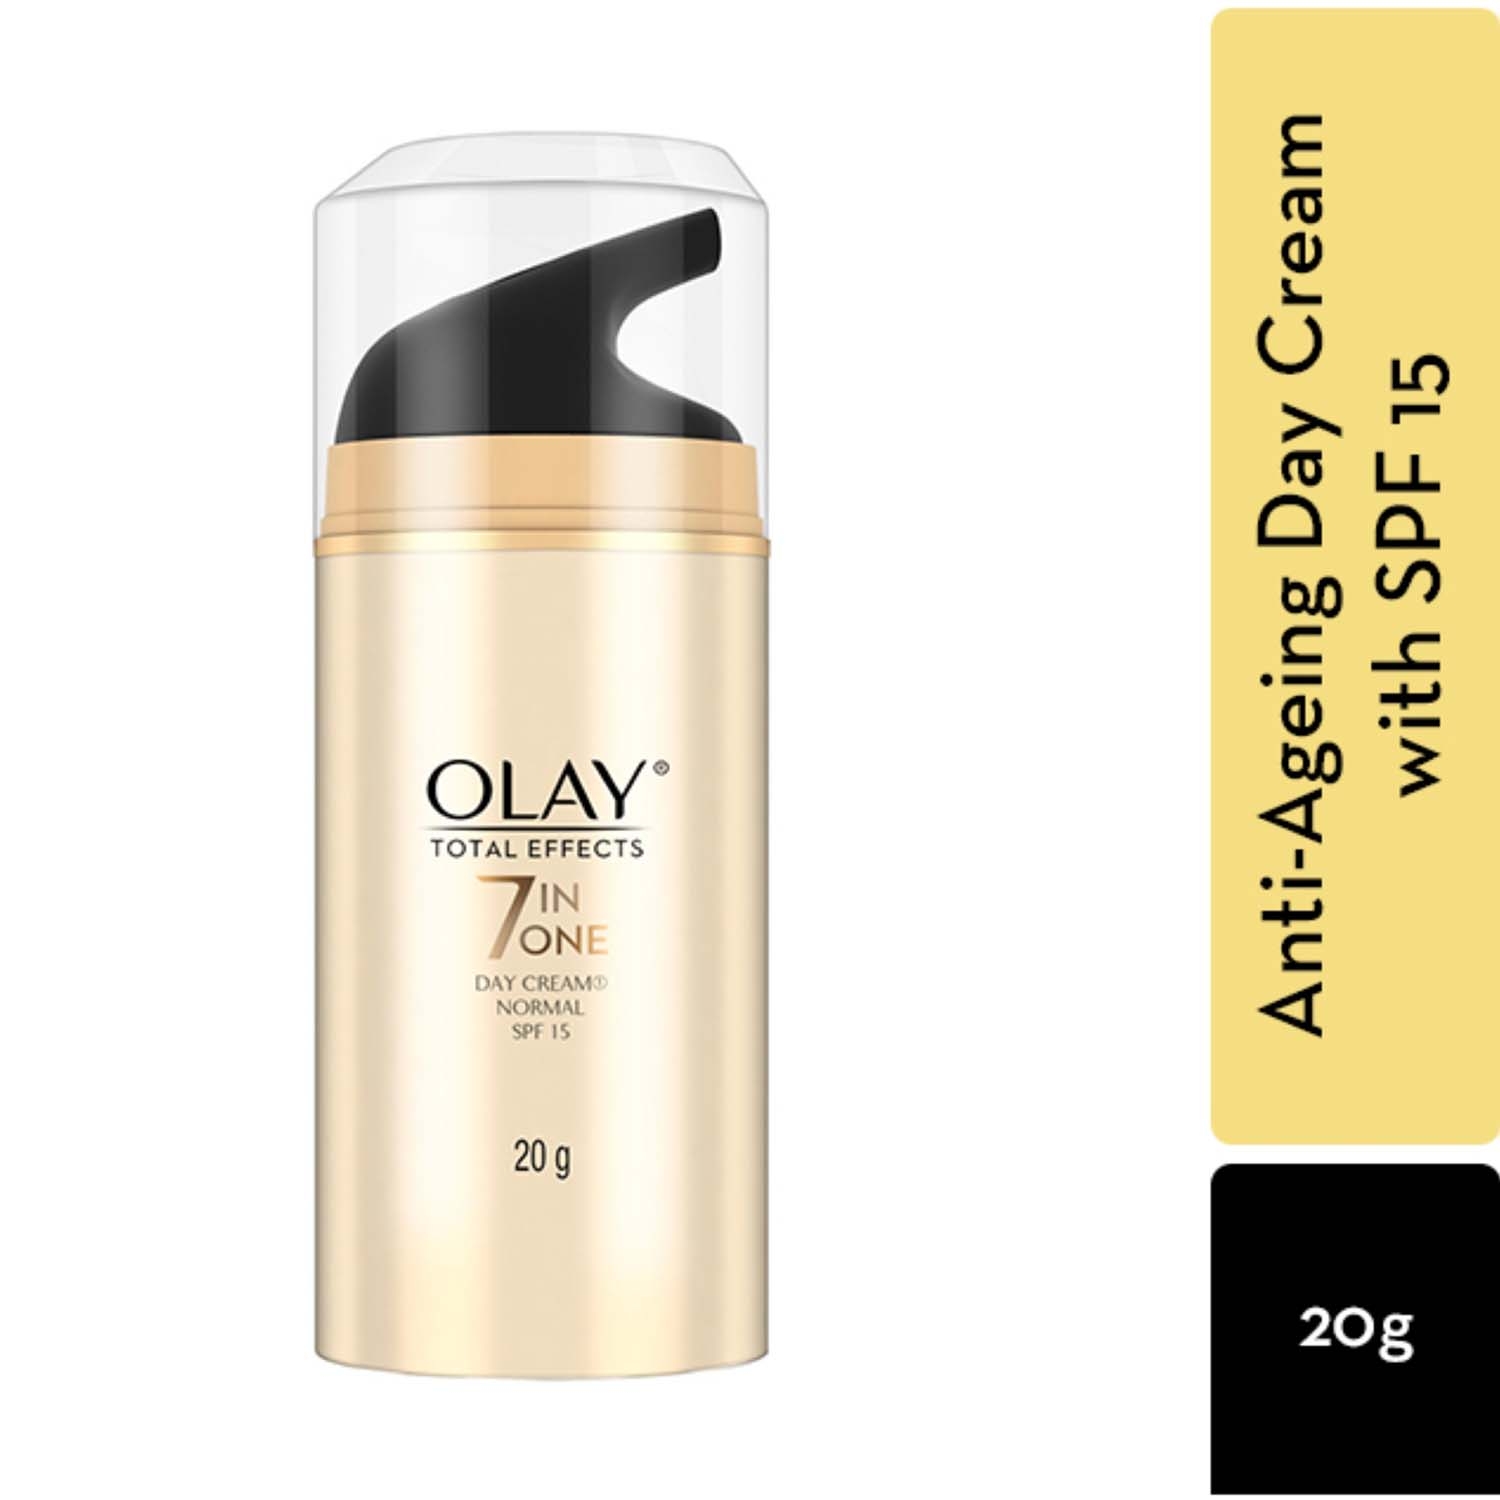 Olay 7-In-1 Total Effects Anti Ageing Day Cream SPF 15 (20g)